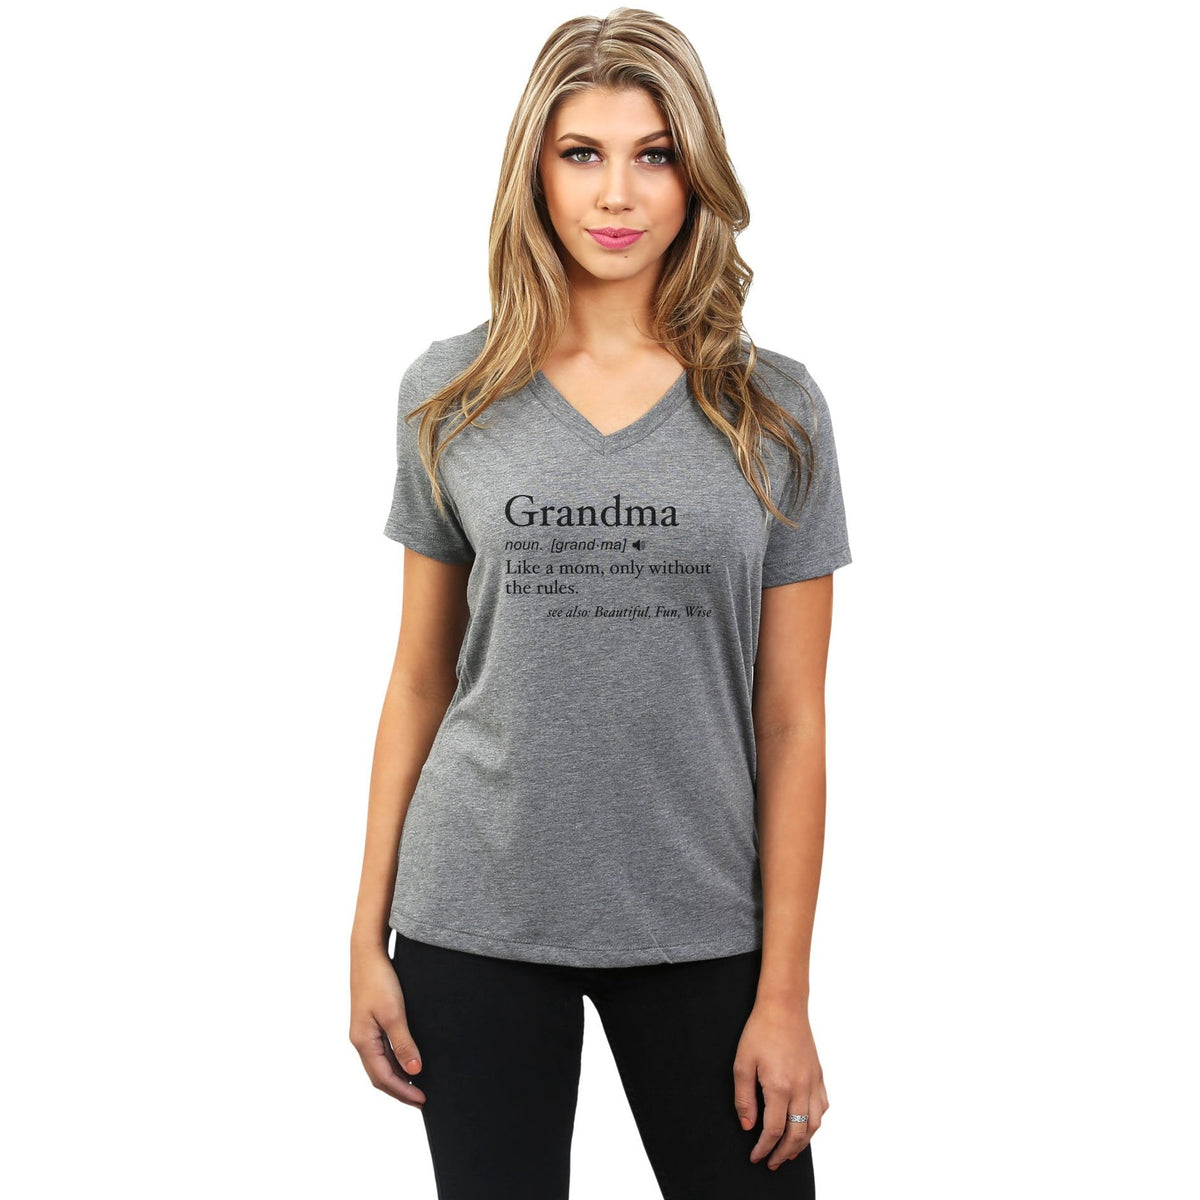 Grandma Definition Women's Relaxed V-Neck Graphic T-Shirt Top Tee by ...